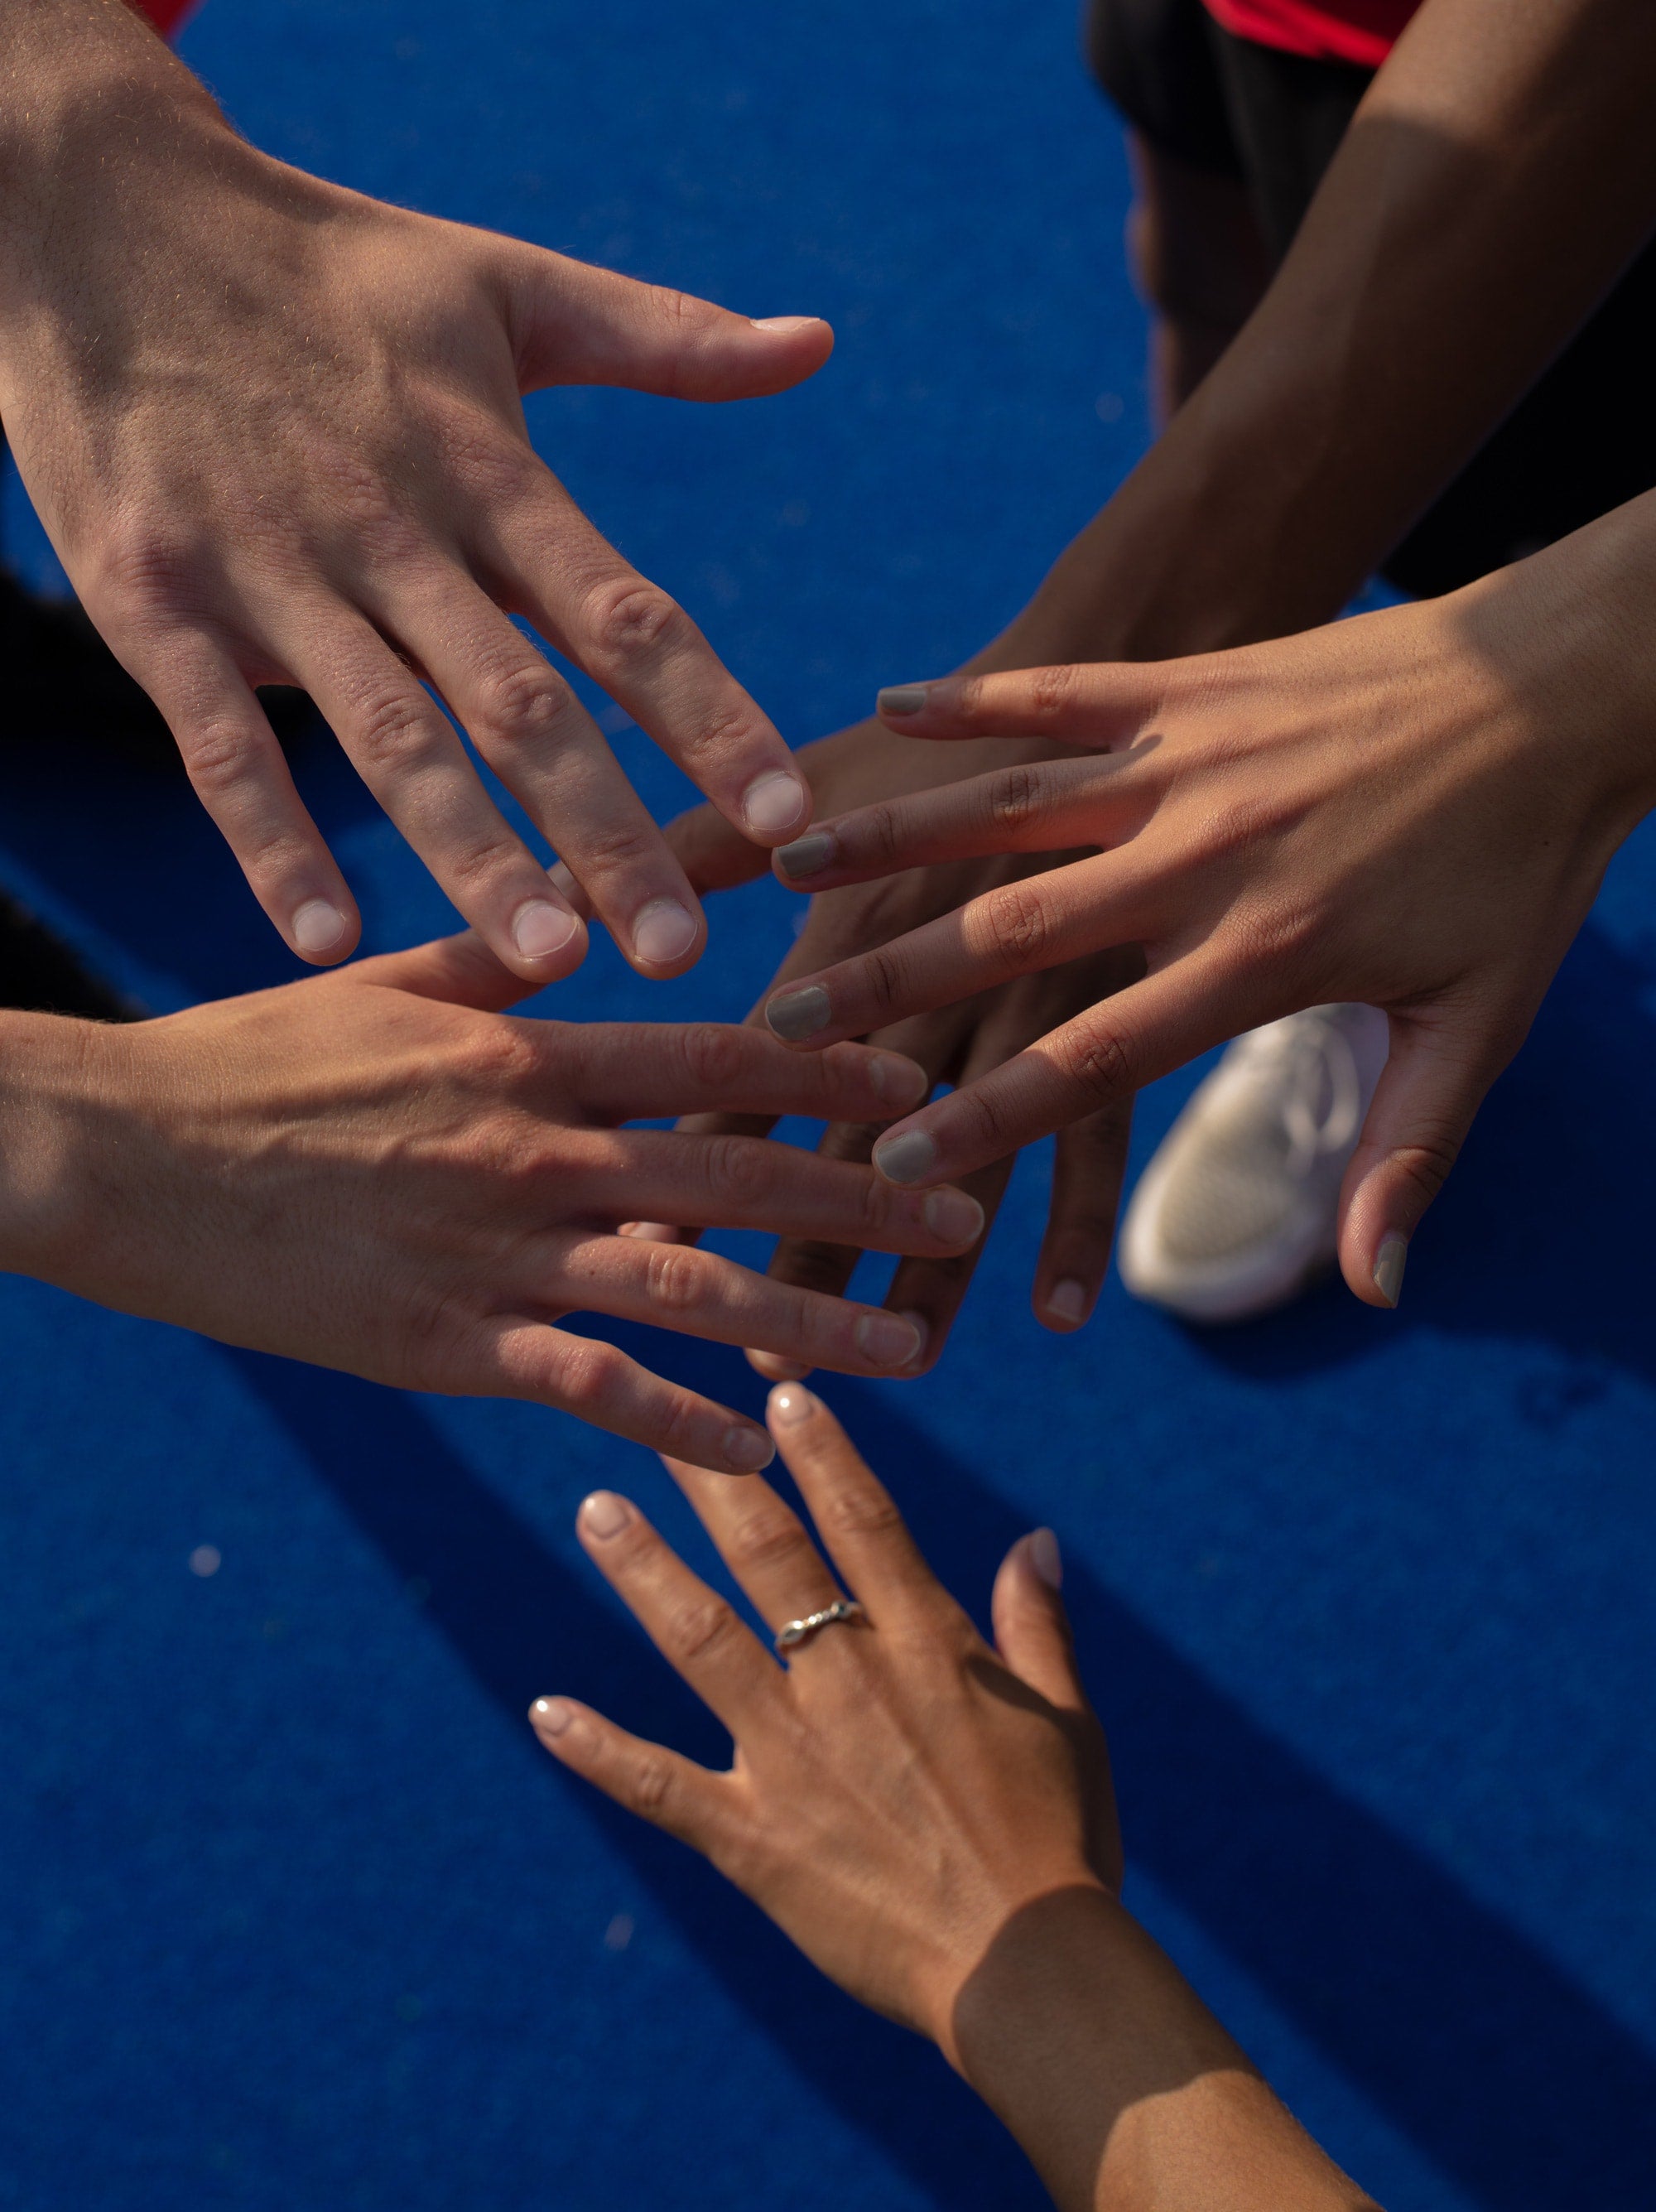 5 people's hands reaching in toward each other.